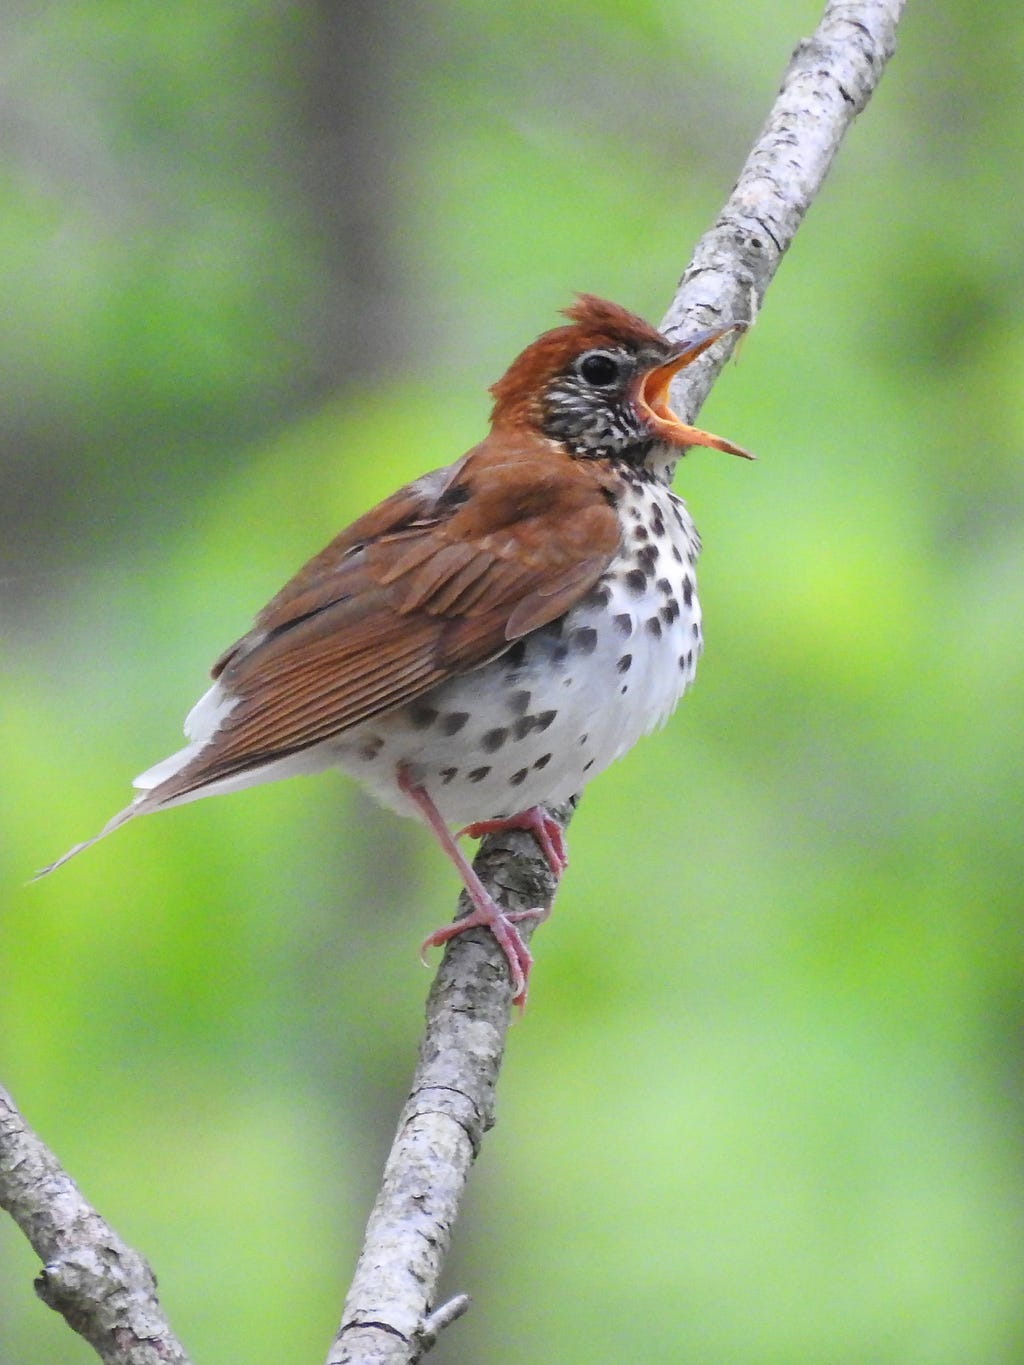 A wood thrush with brown wings and a mostly grayish-white underbelly perches on a thin branch with its beak open.